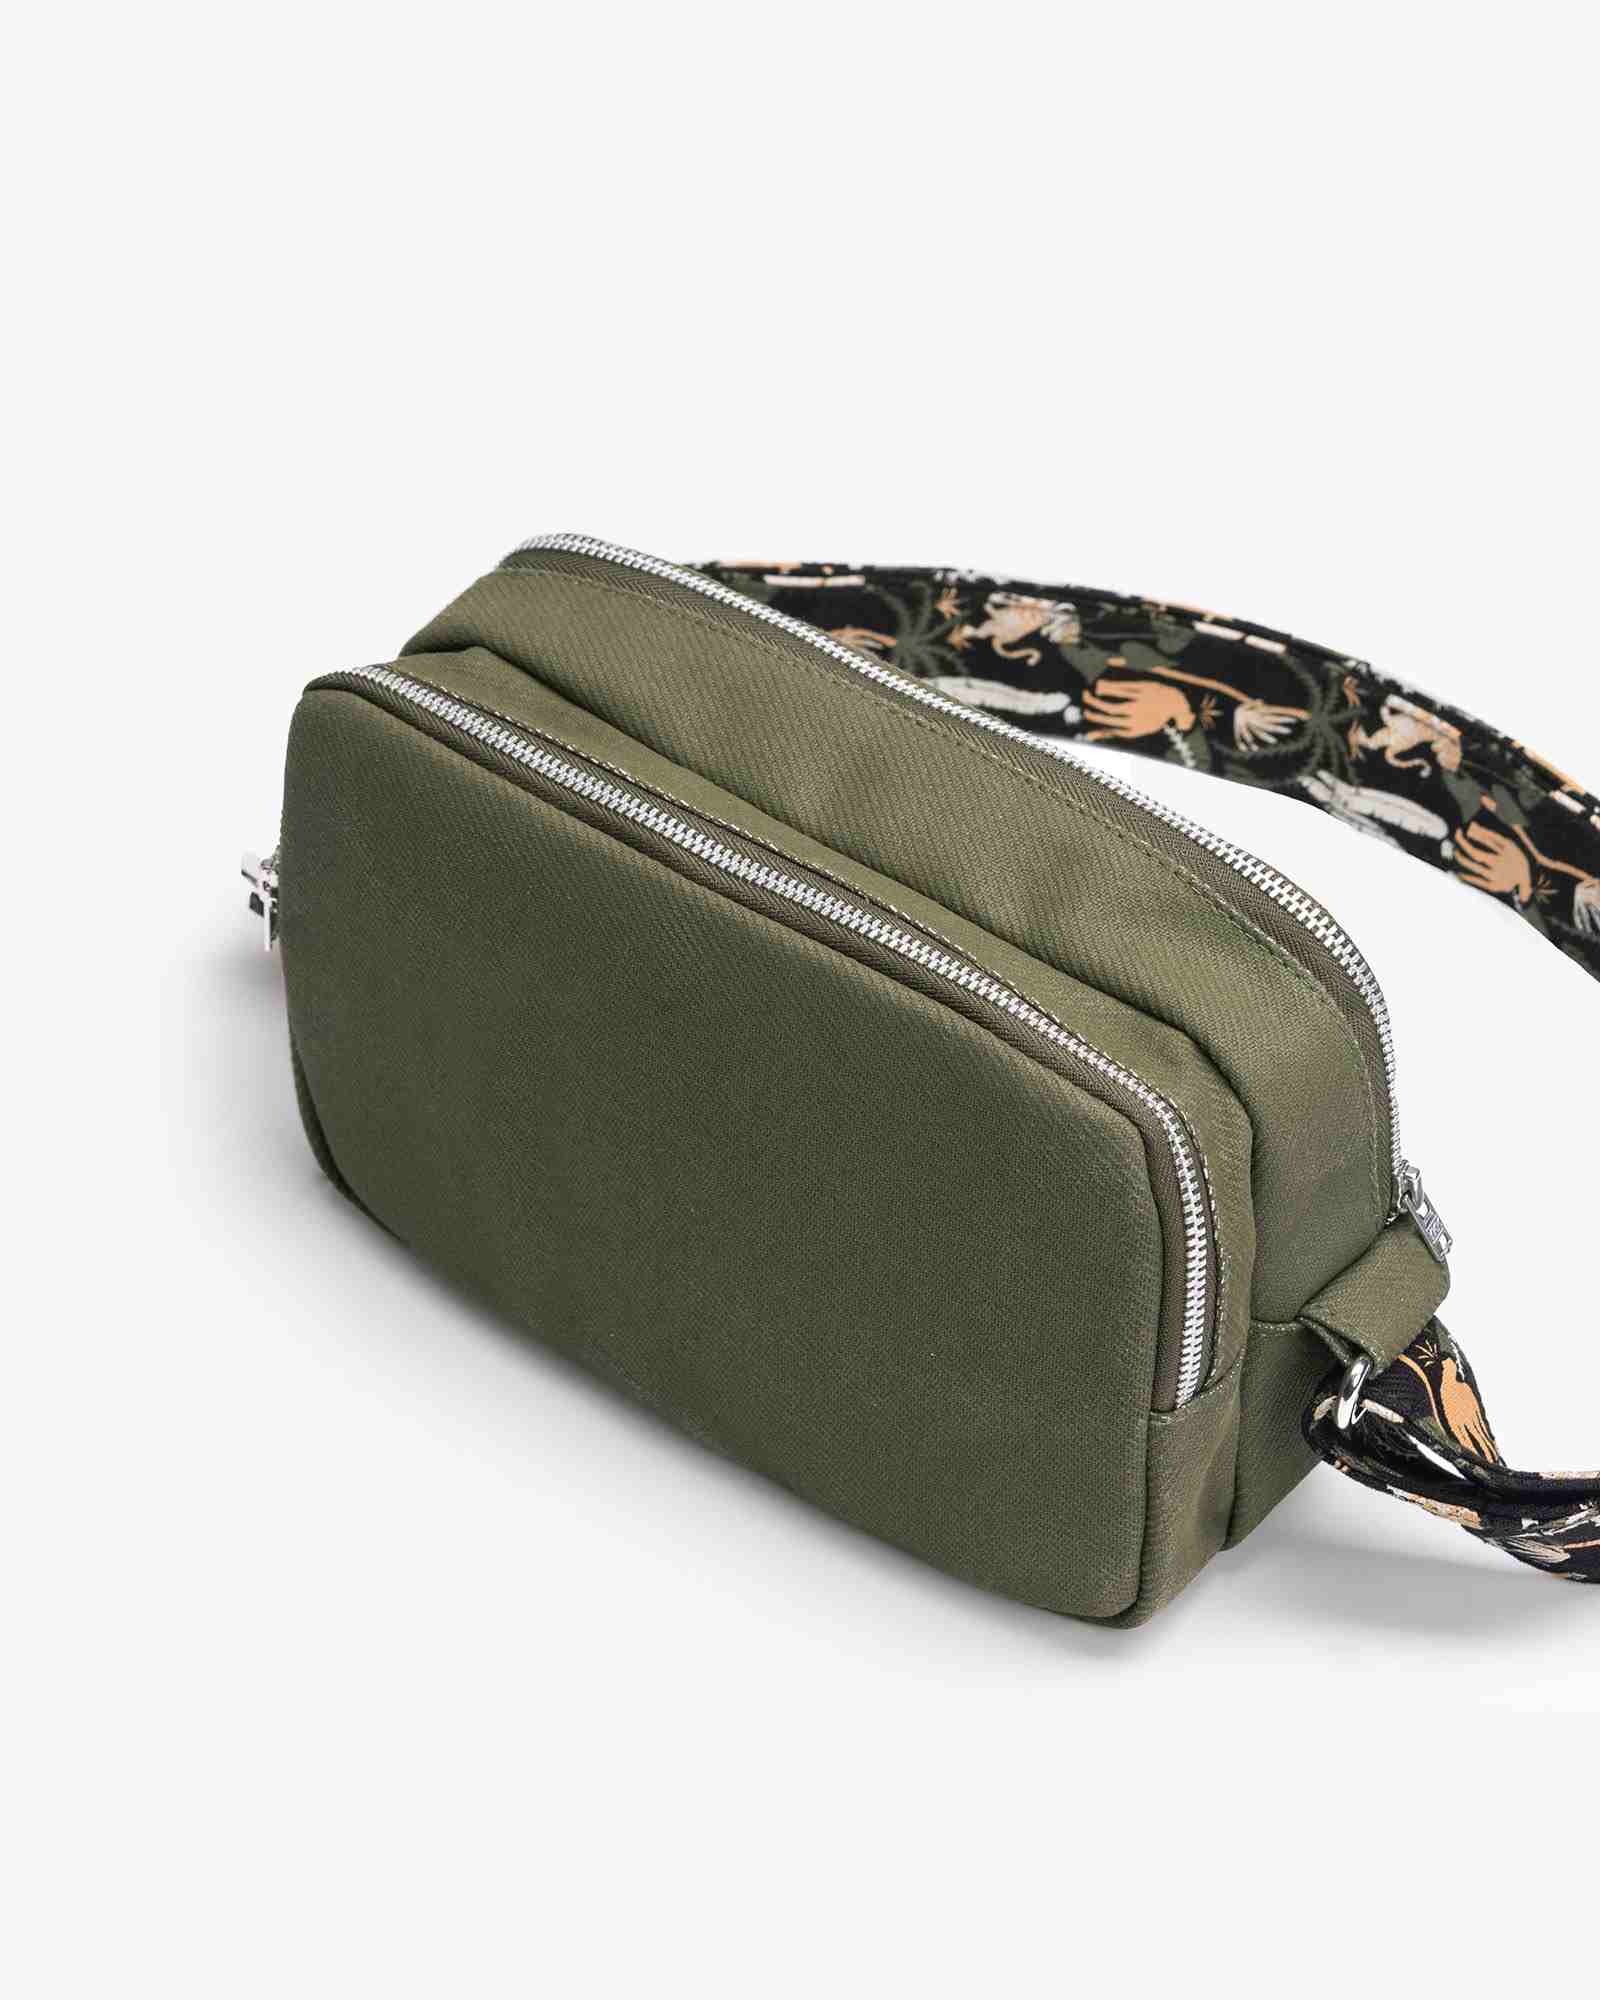 The Box Sling - Night Safari: Eco-Friendly and Sustainable The Box Sling by ecoright